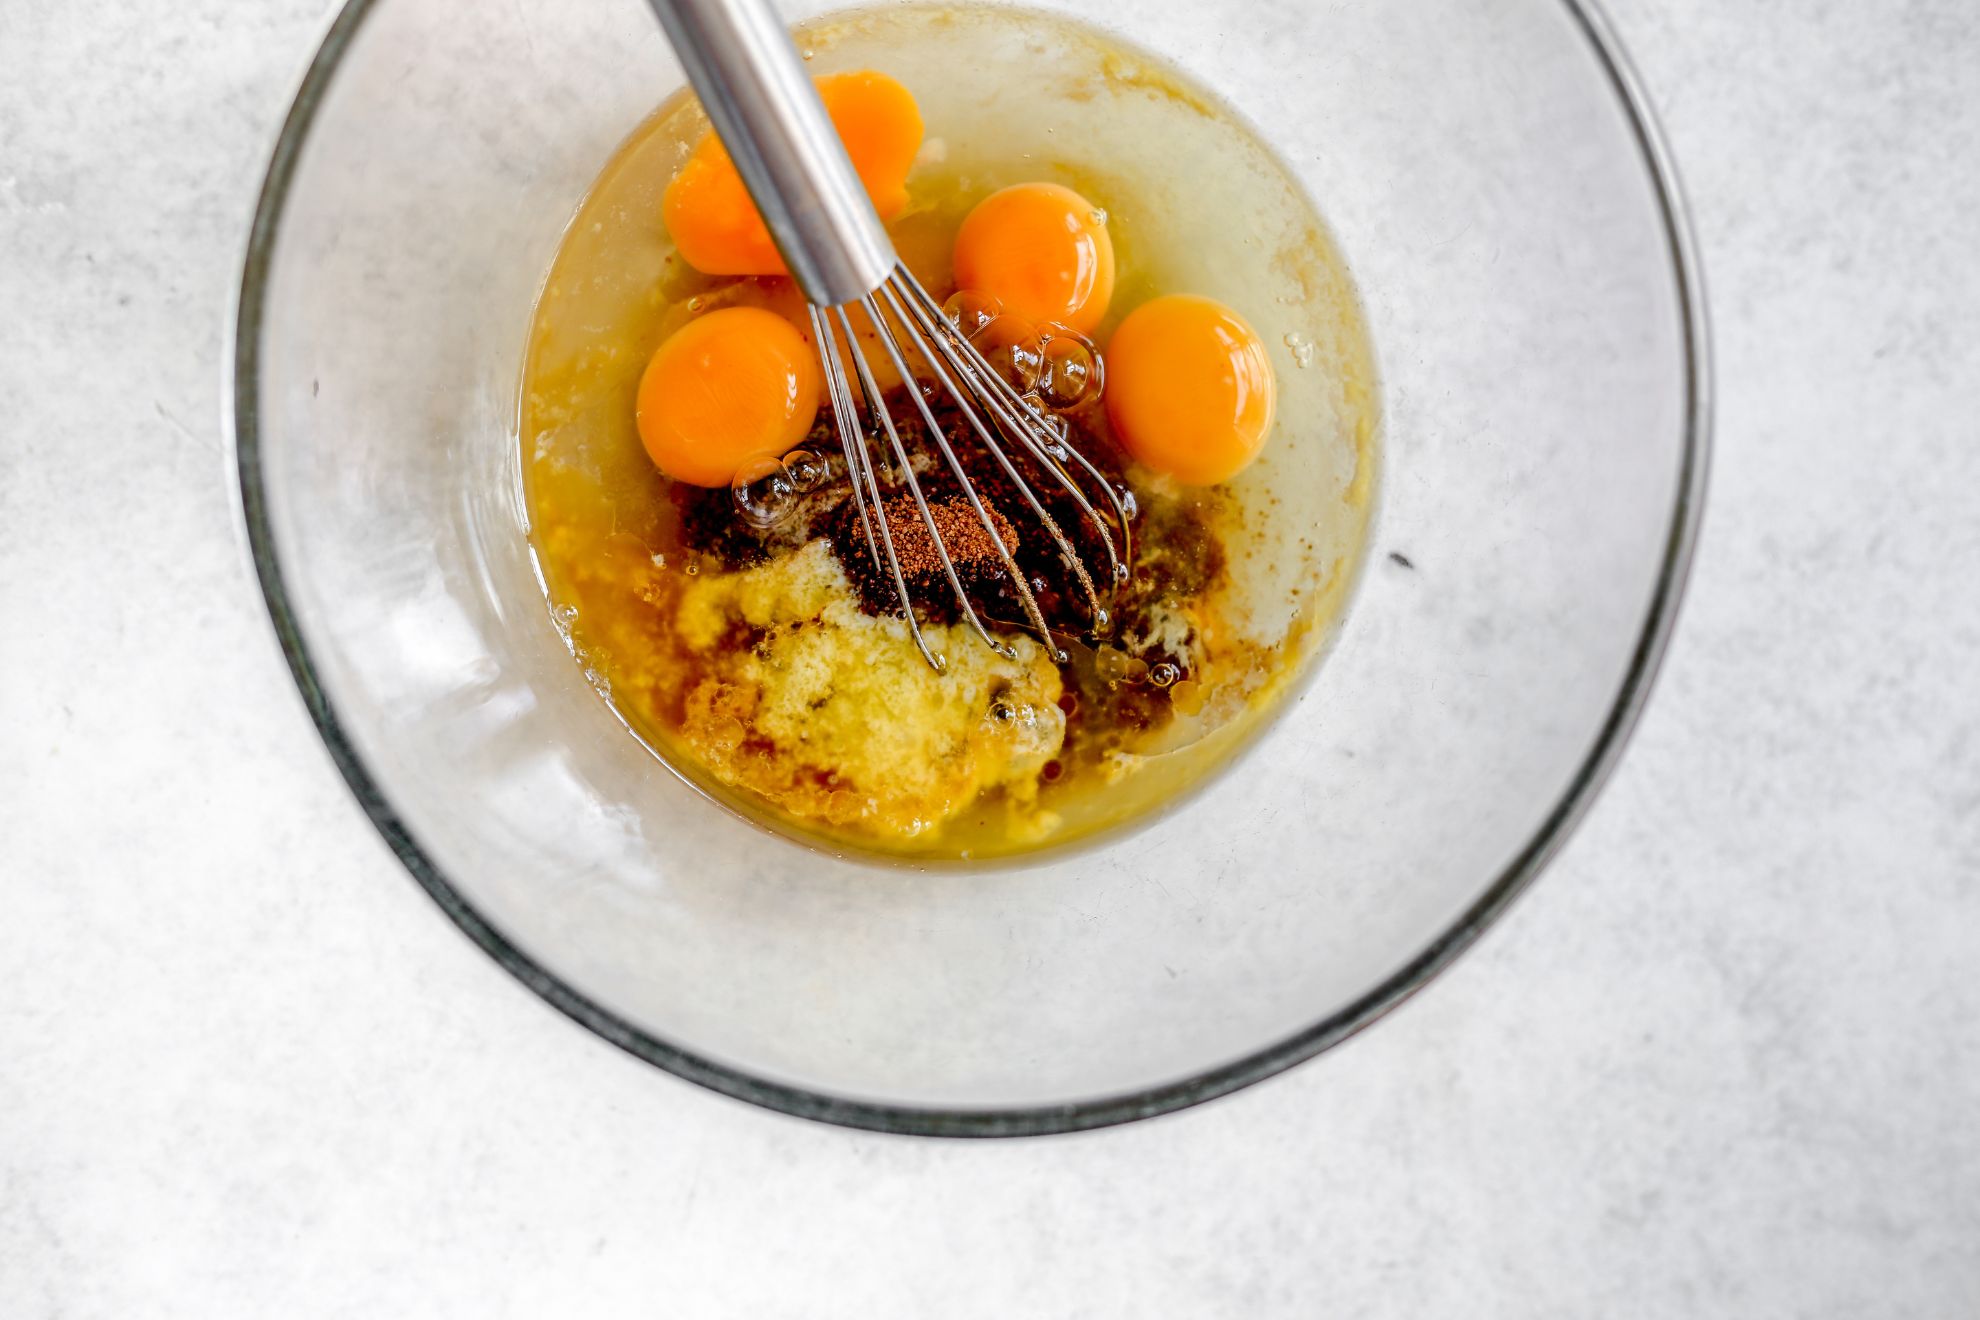 This is an overhead horizontal image of a glass bowl with eggs, coconut sugar and more wet ingredients in it. A whisk is in the center of the bowl with the handle leaning against the side pointing to the top center of the image. The ingredients aren't yet mixed together. The bowl sits on a light grey/white surface.